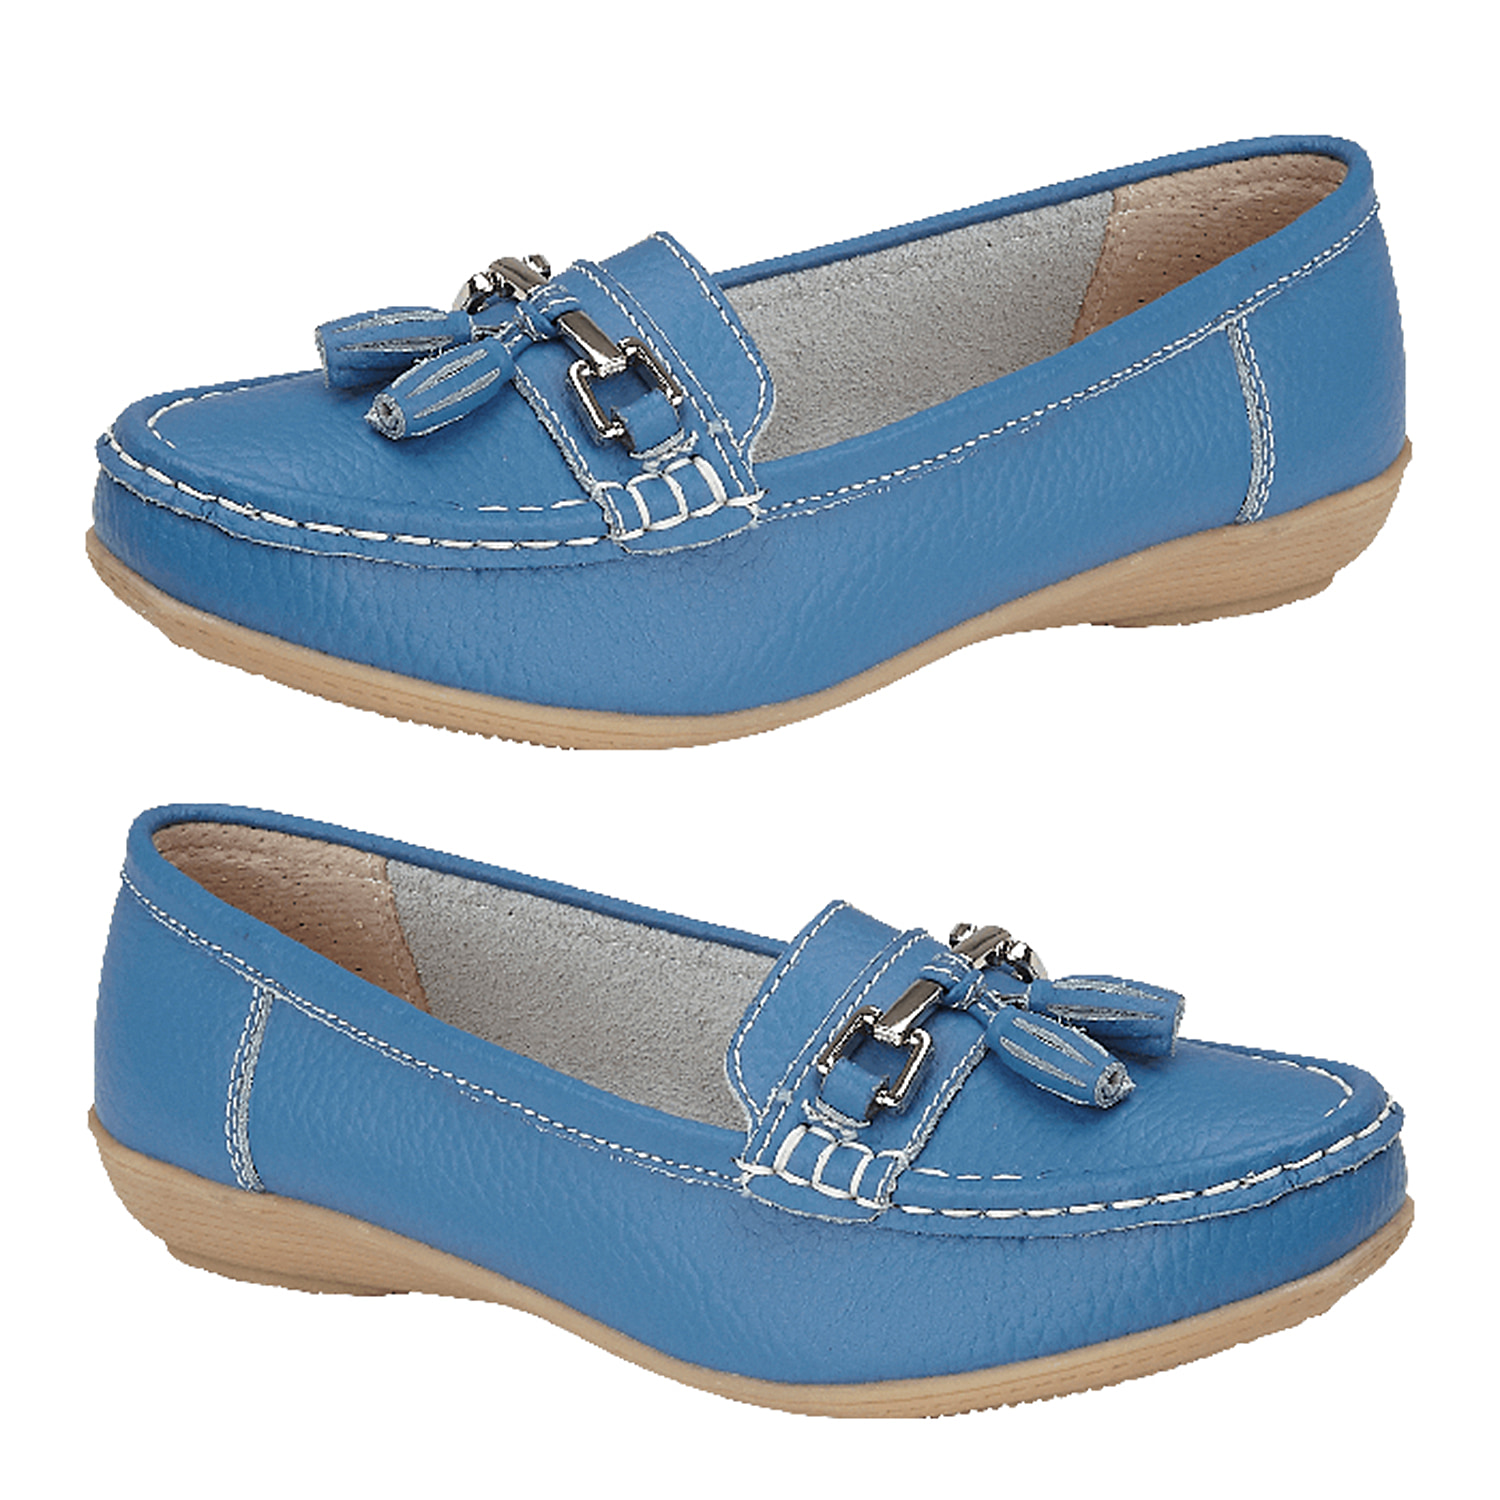 Womens Slip on Casual Leather Loafer with Tassle (Size 4) - Blue